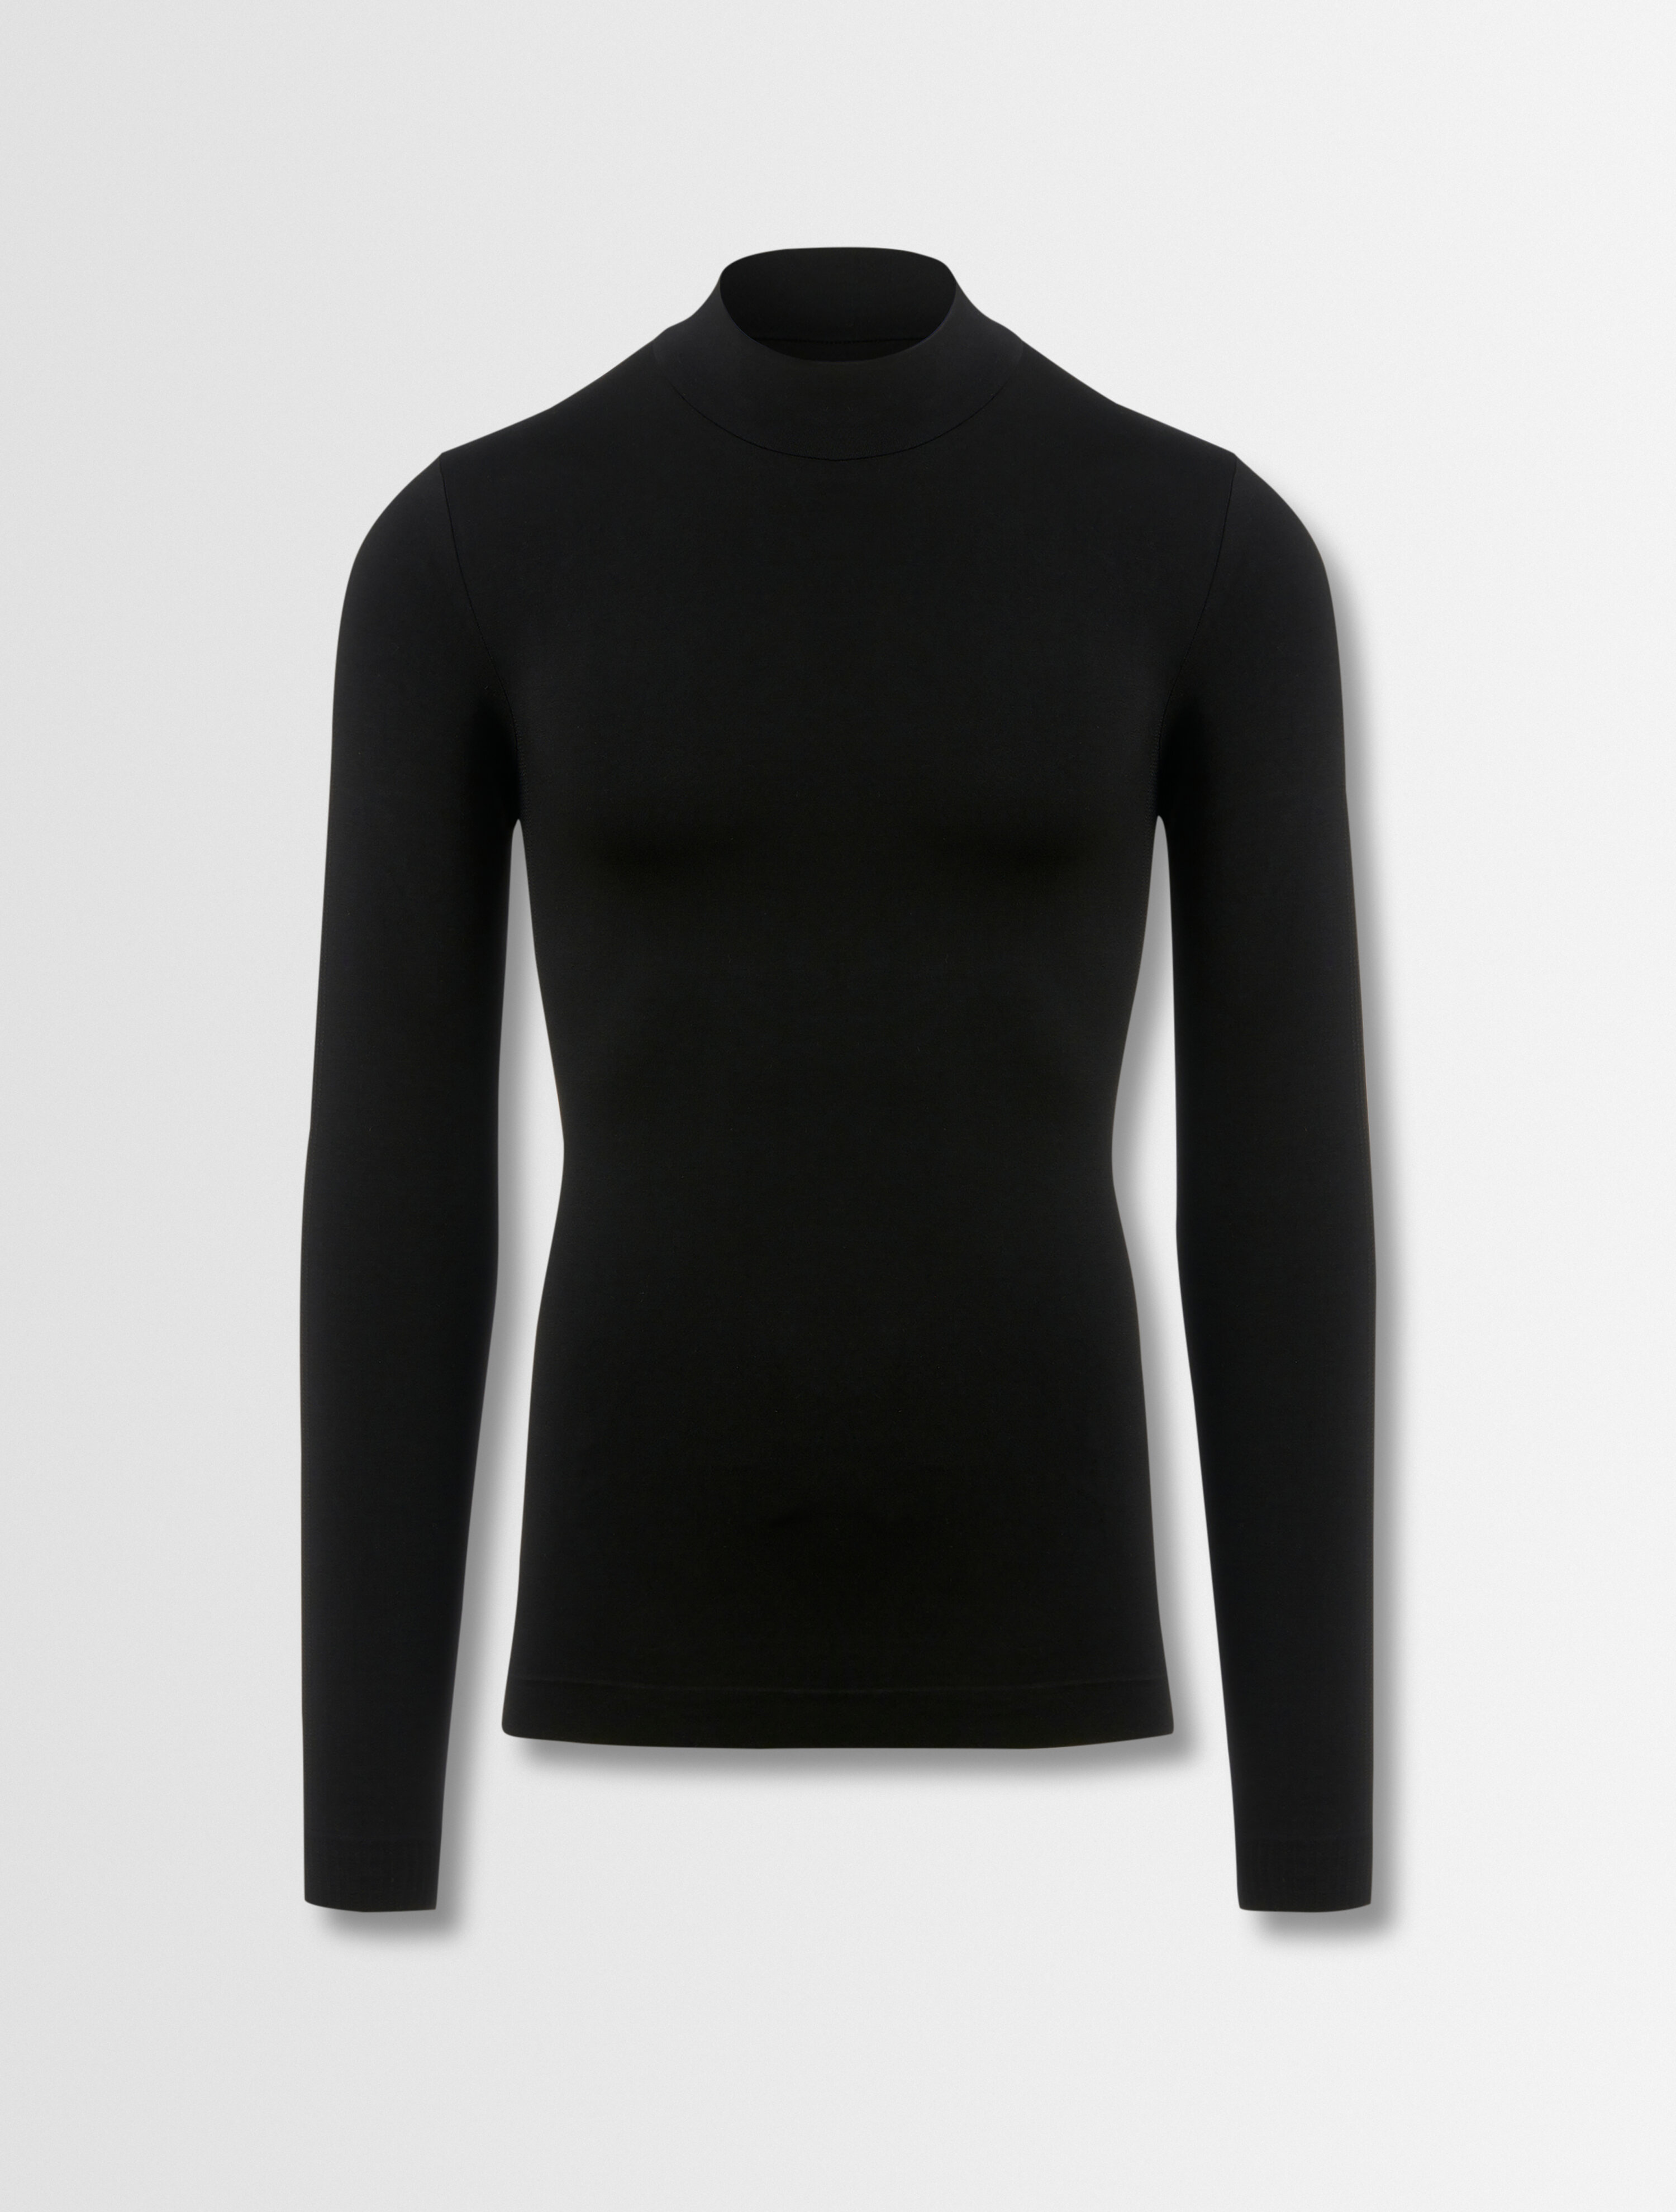 Owen technical and cashmere thermal layer | Fusalp